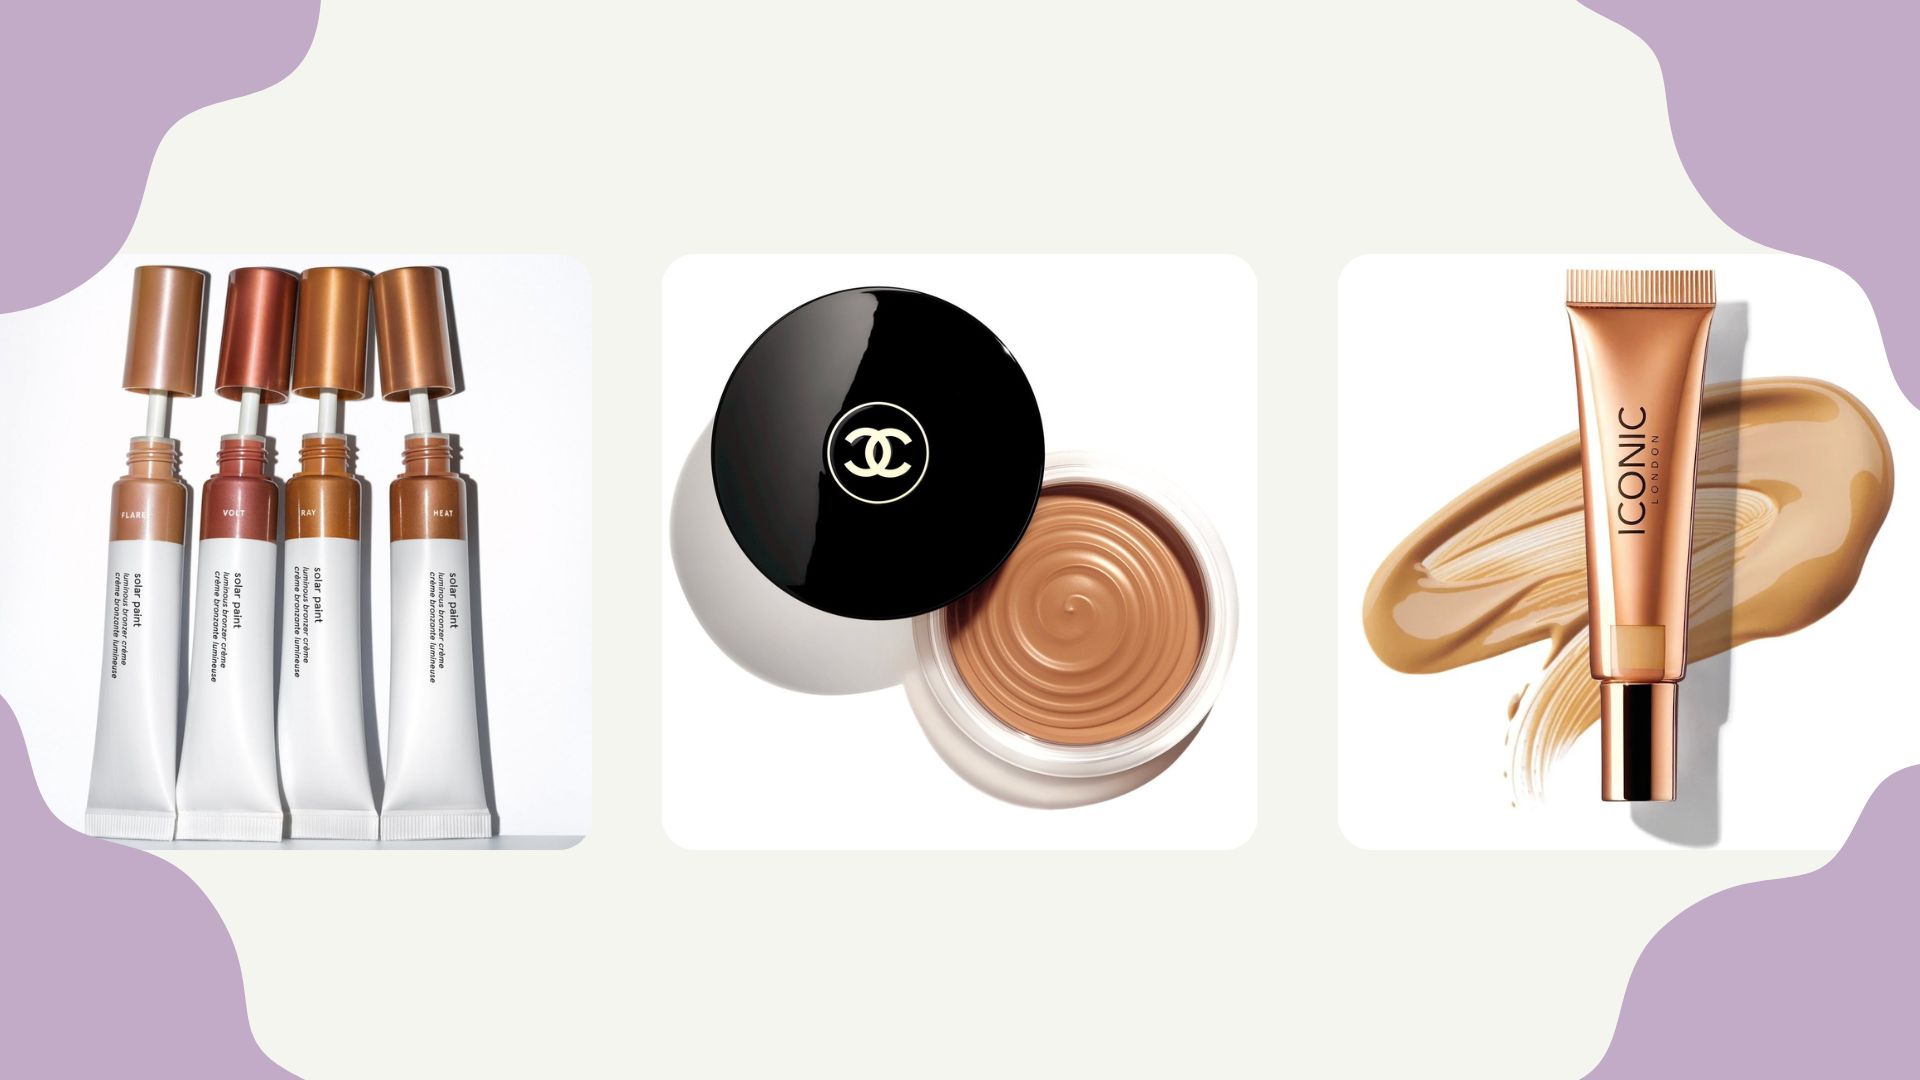 Fiasko forum glans The best cream bronzers for a sunkissed glow on every skin | Woman & Home